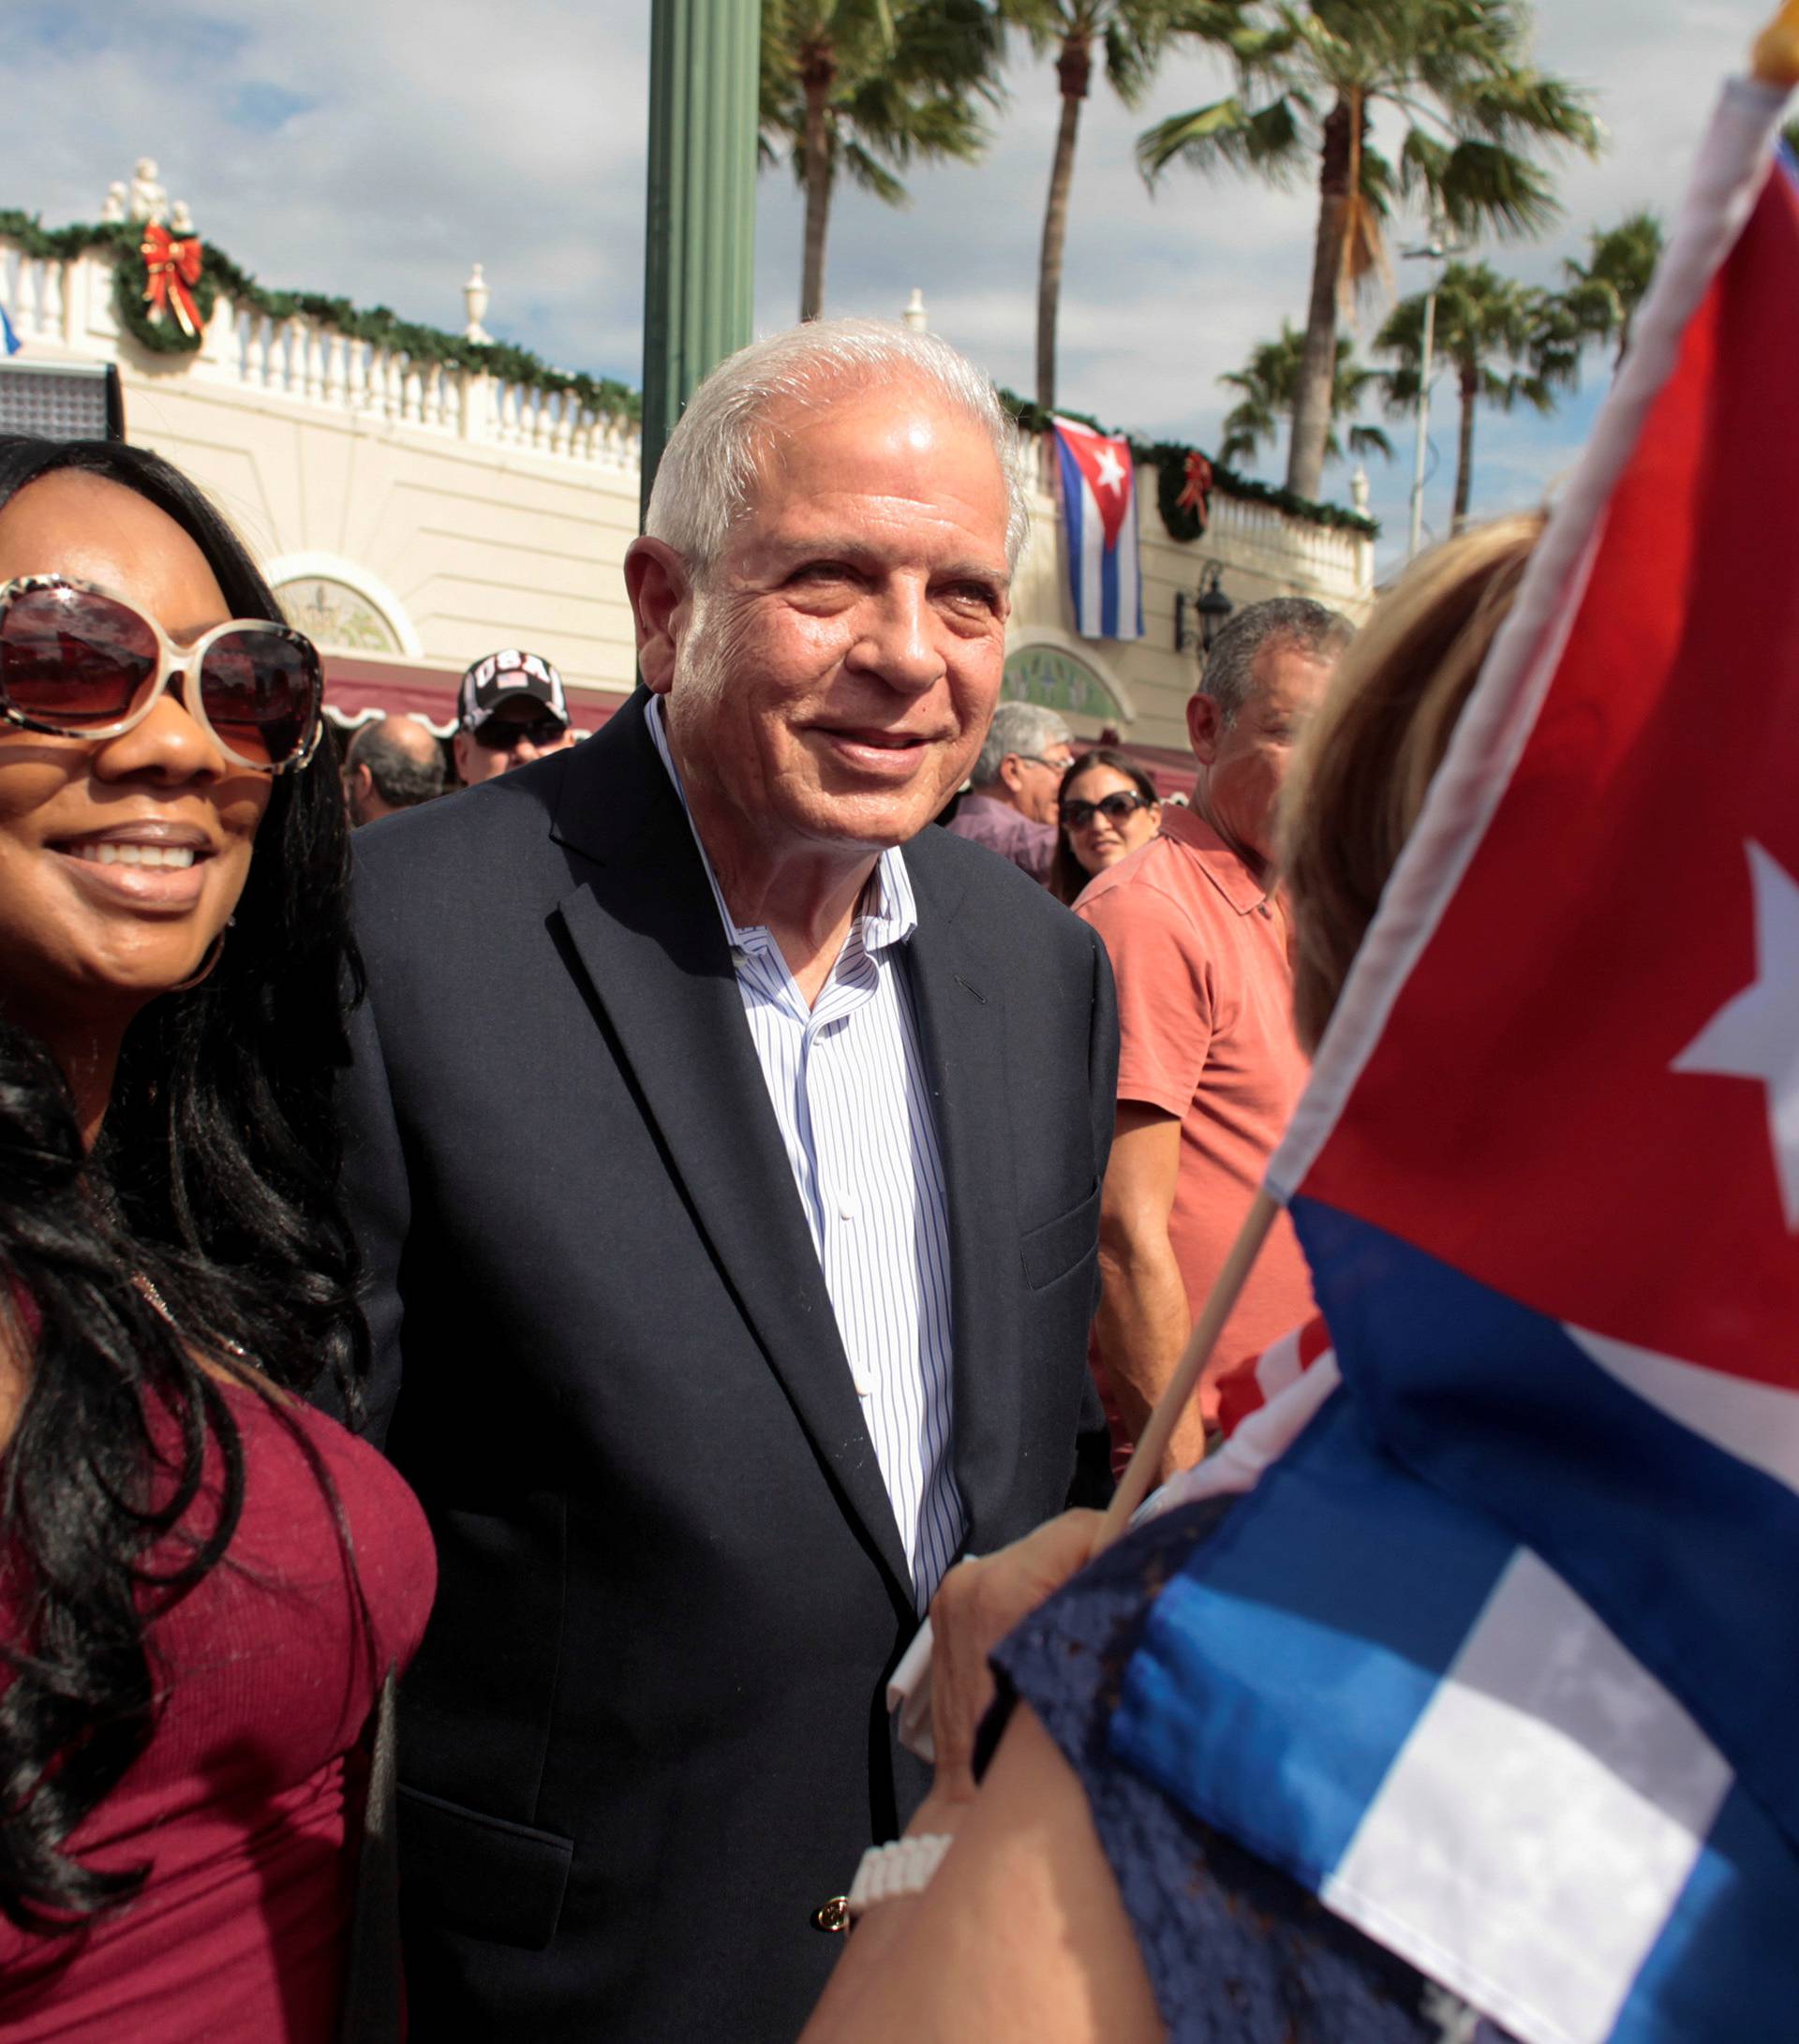 Miami Mayor Tomas Regalado gathers with people who celebrate after the announcement of the death of Cuban revolutionary leader Fidel Castro in the Little Havana district of Miami